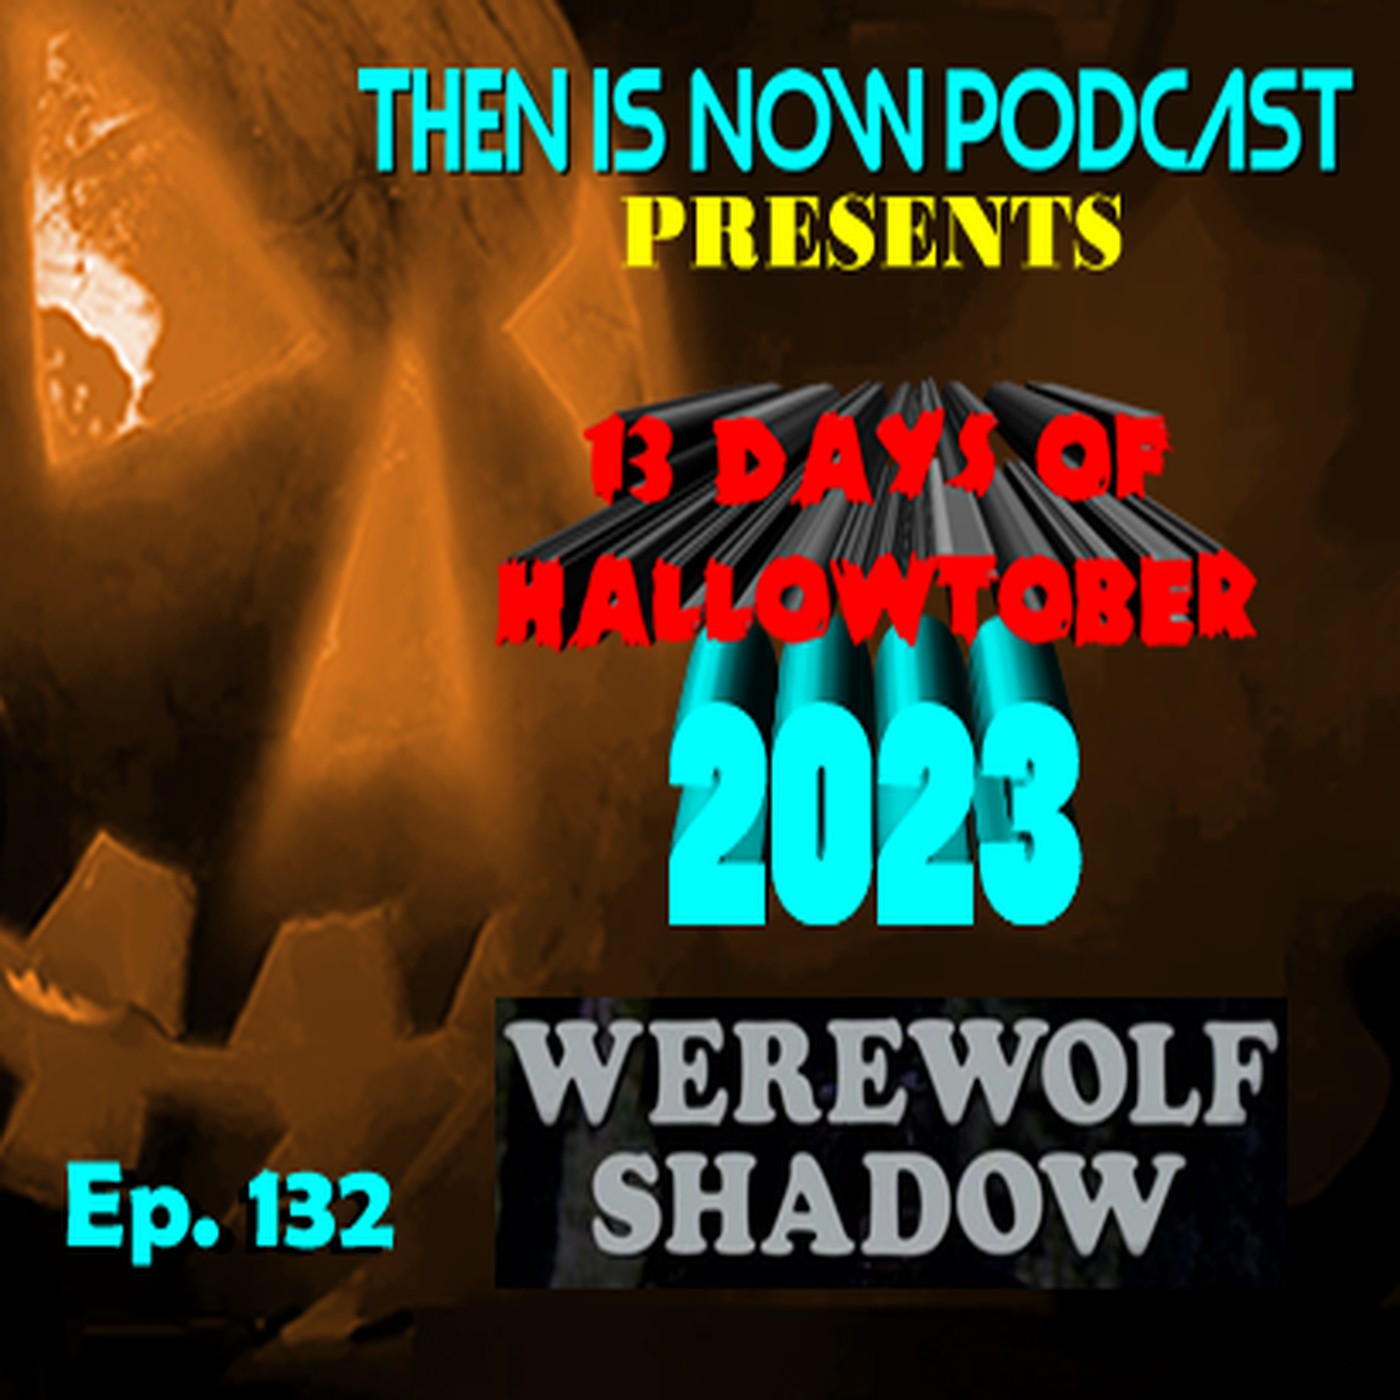 Then Is Now Ep. 132 - 13 Days of Hallowtober - Paul Naschy Part 1 with Rod Barnett